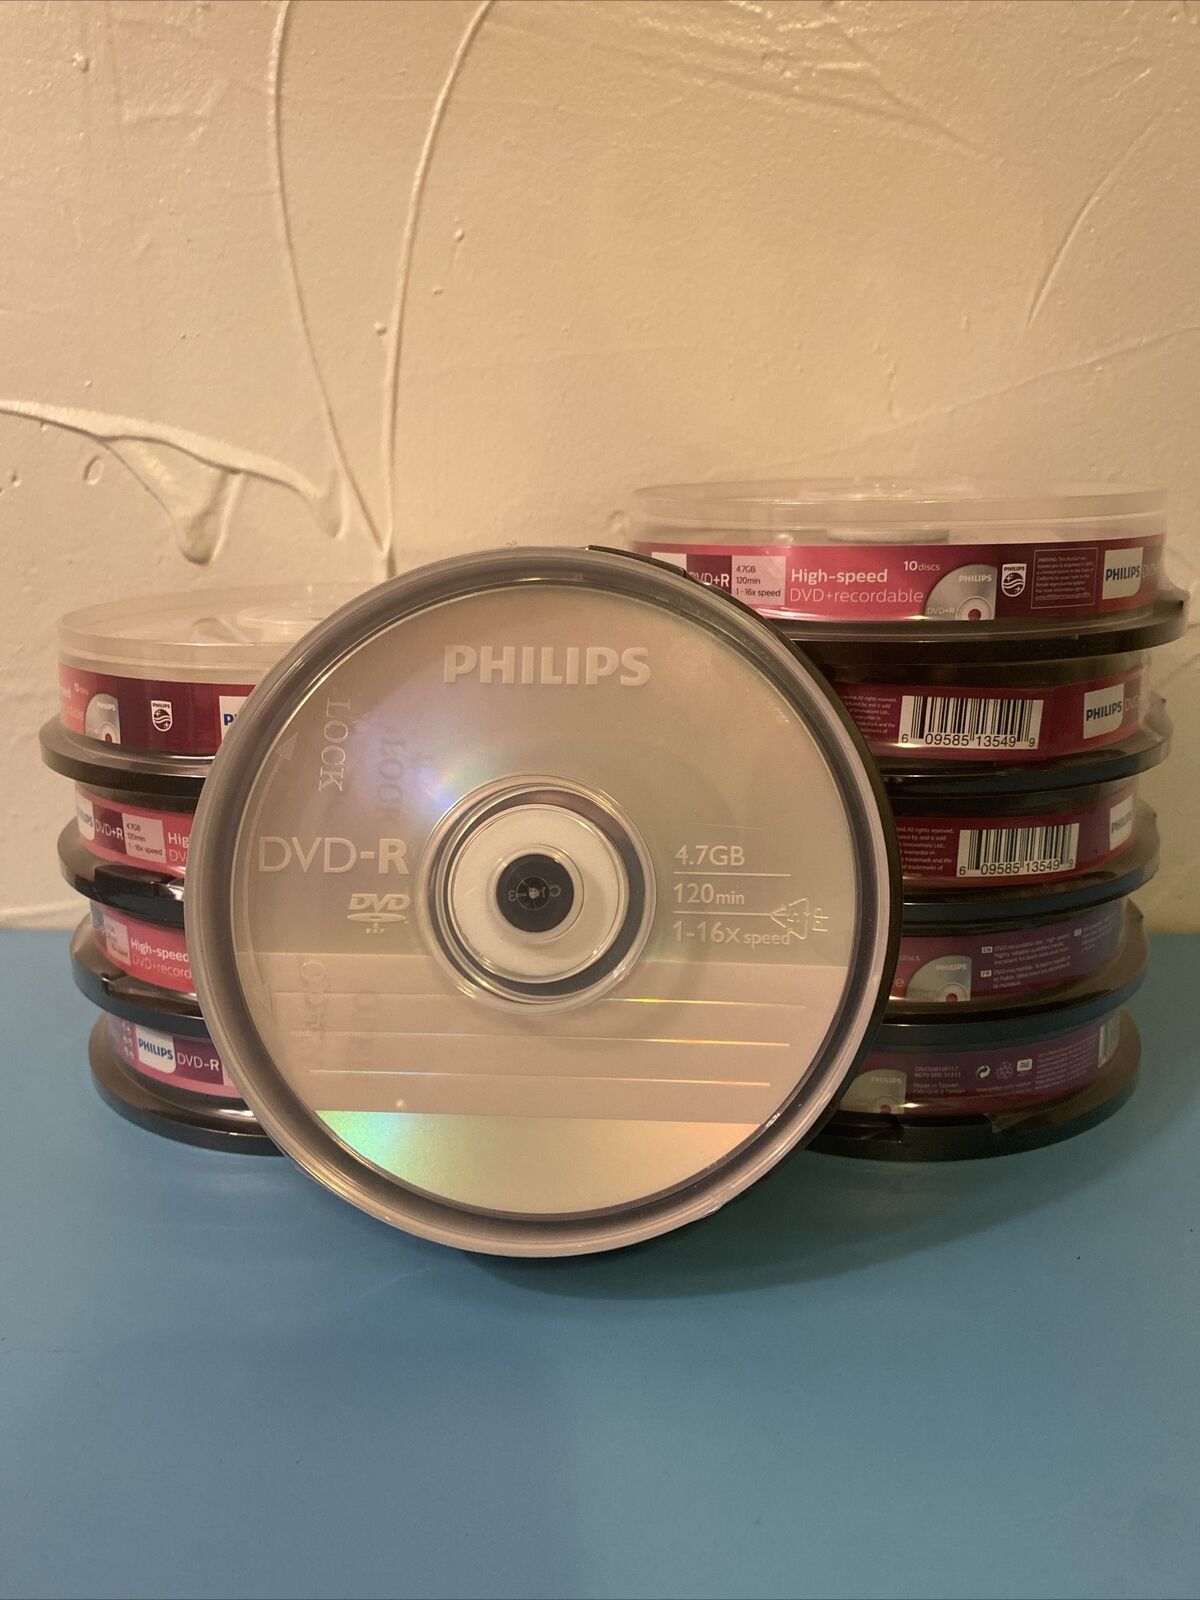 Lot of 10 Packs of 10 | Philips DVD+R 1-16x Speed 120min 4.7 GB | 100 Total